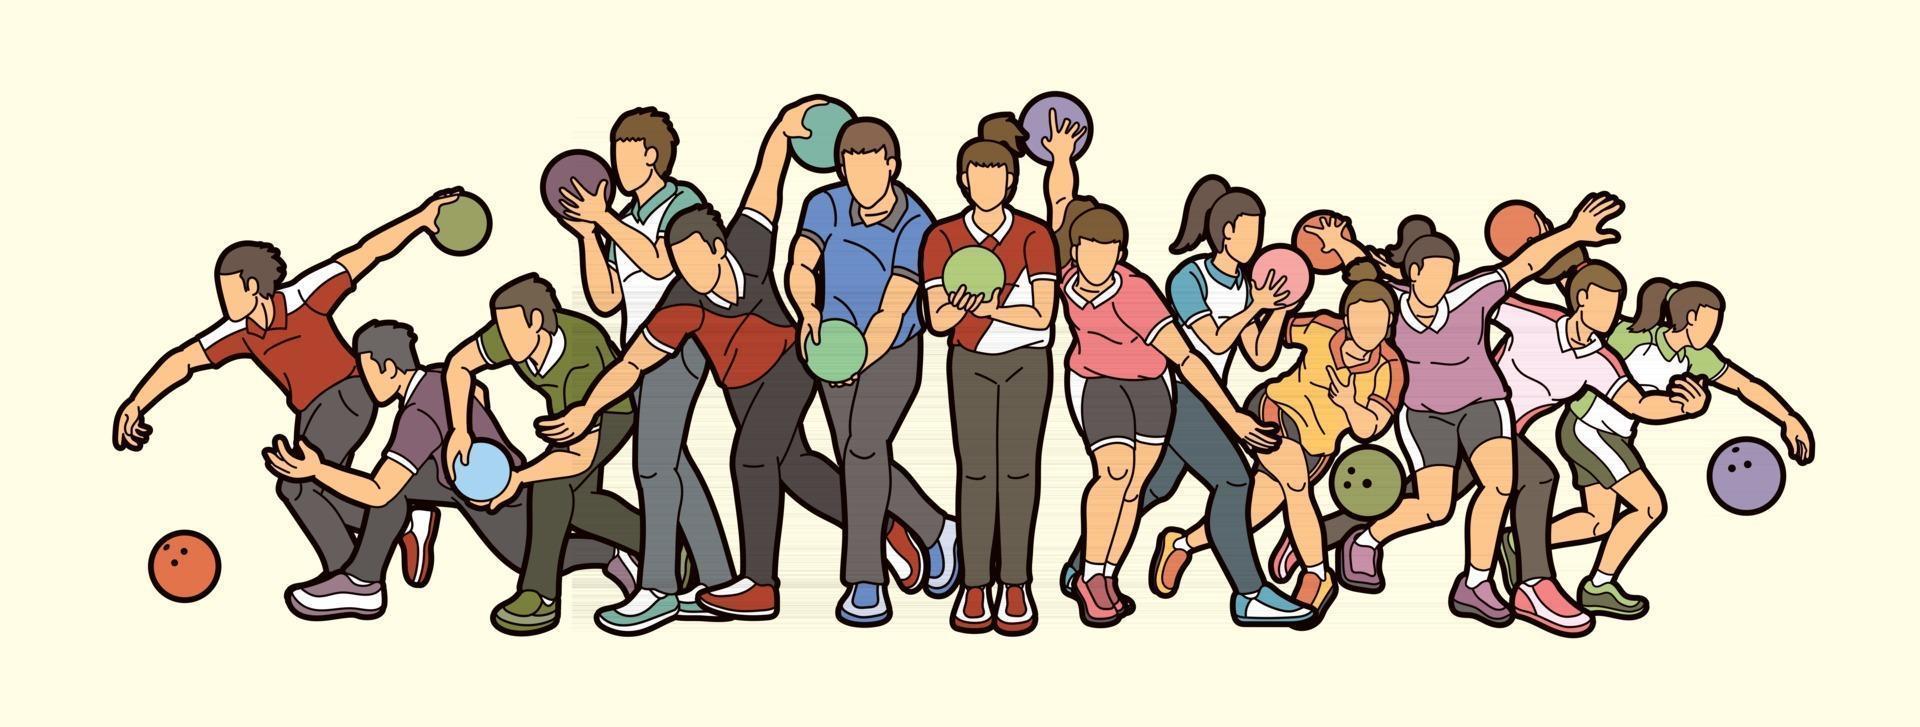 Group of Bowling Players Sport Player Action vector